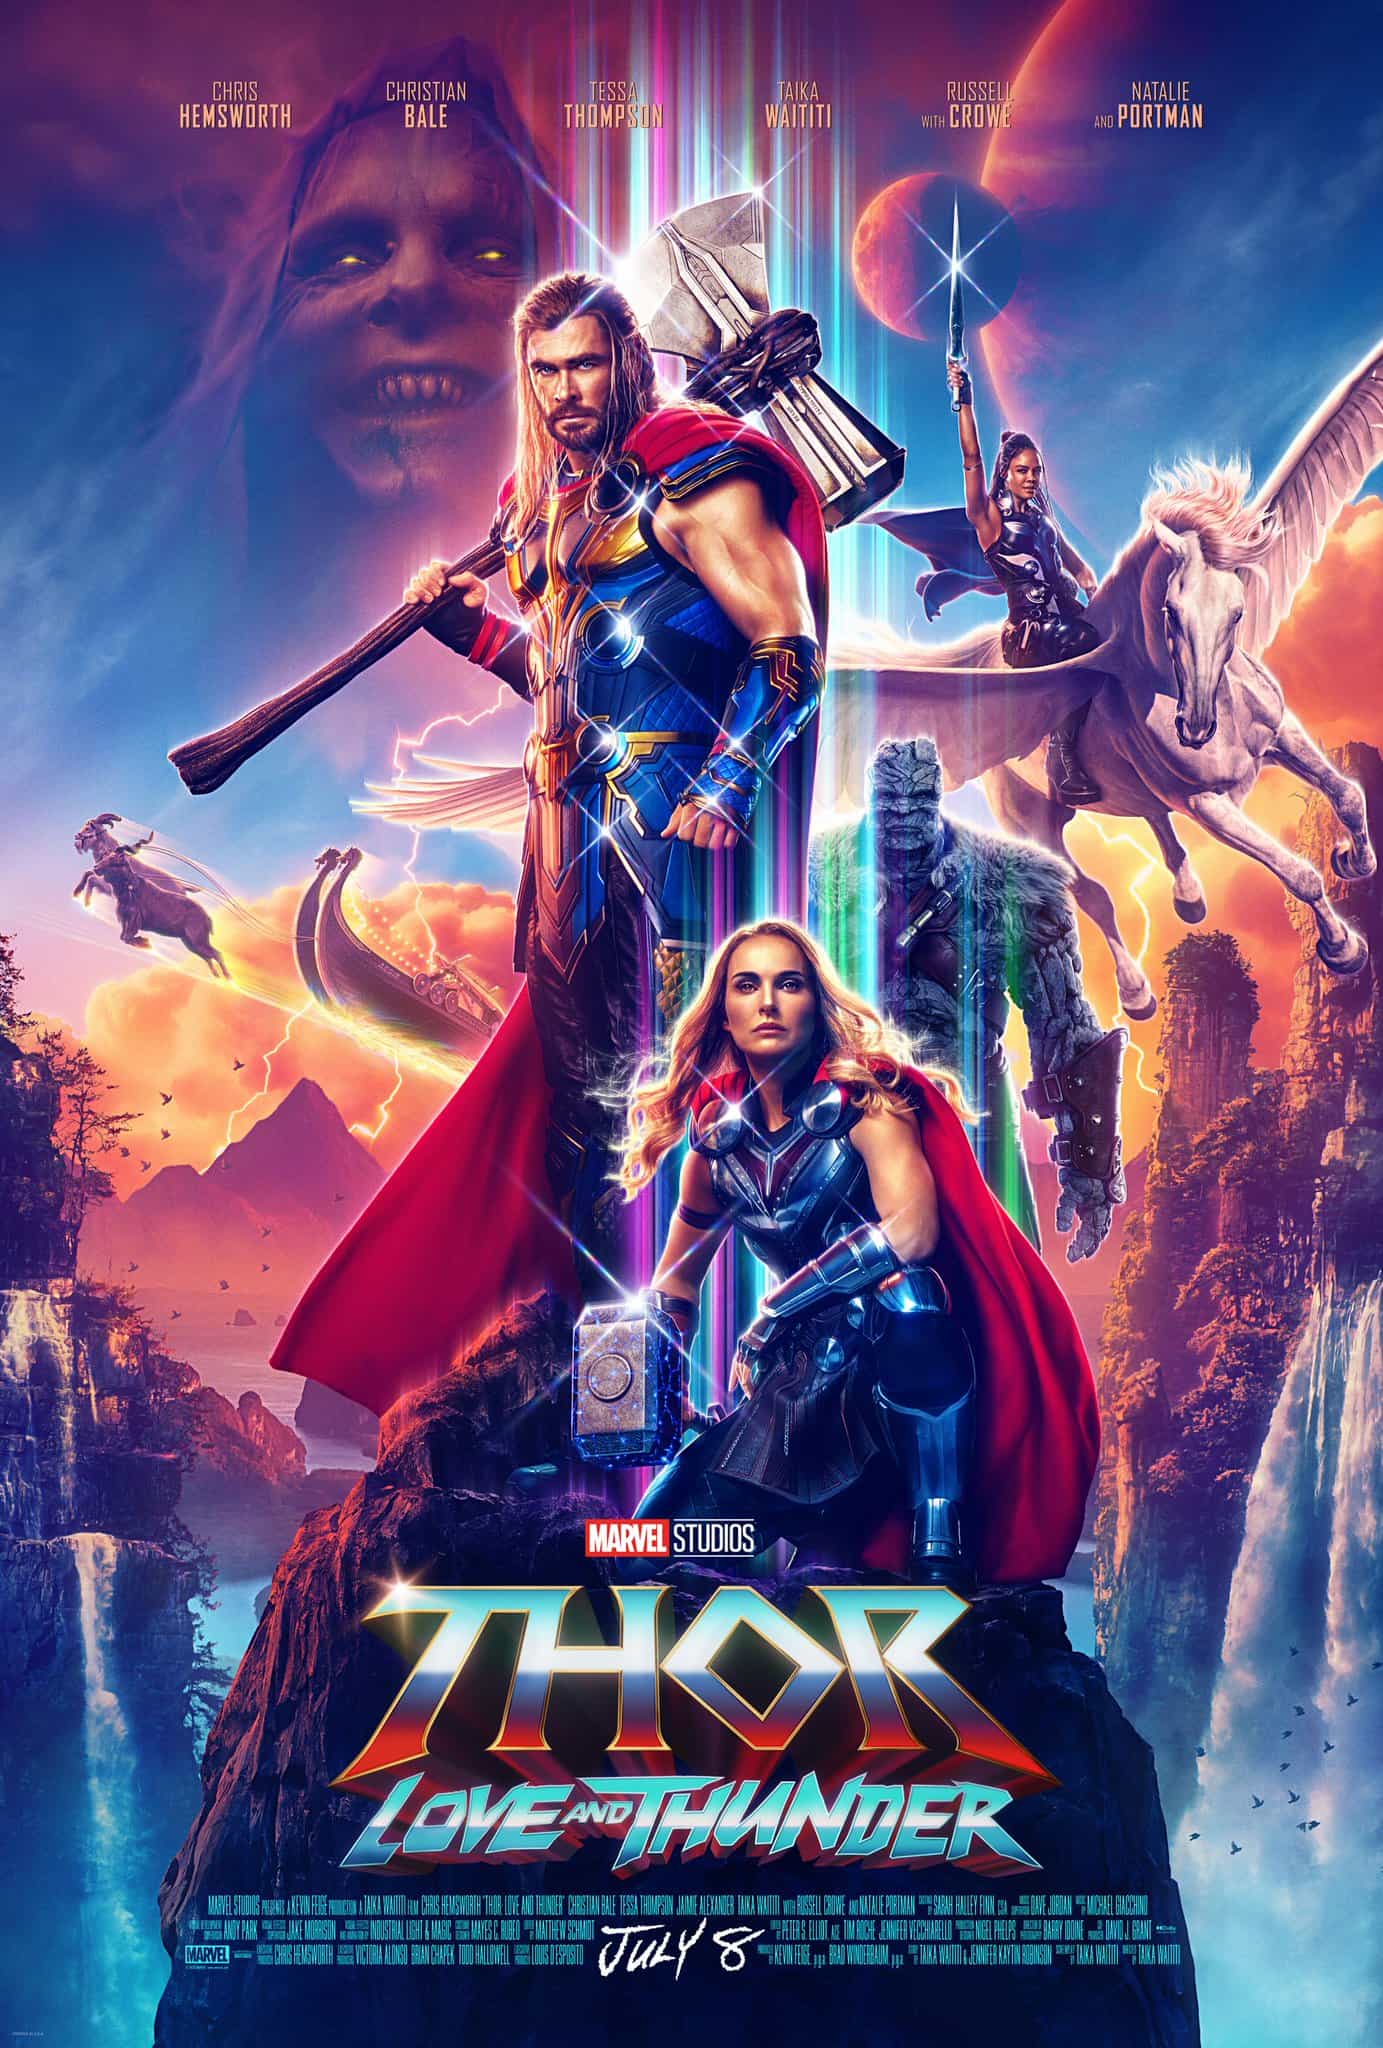 Thor: Love and Thunder takes over $15 Million internationally on its early Wednesday previews